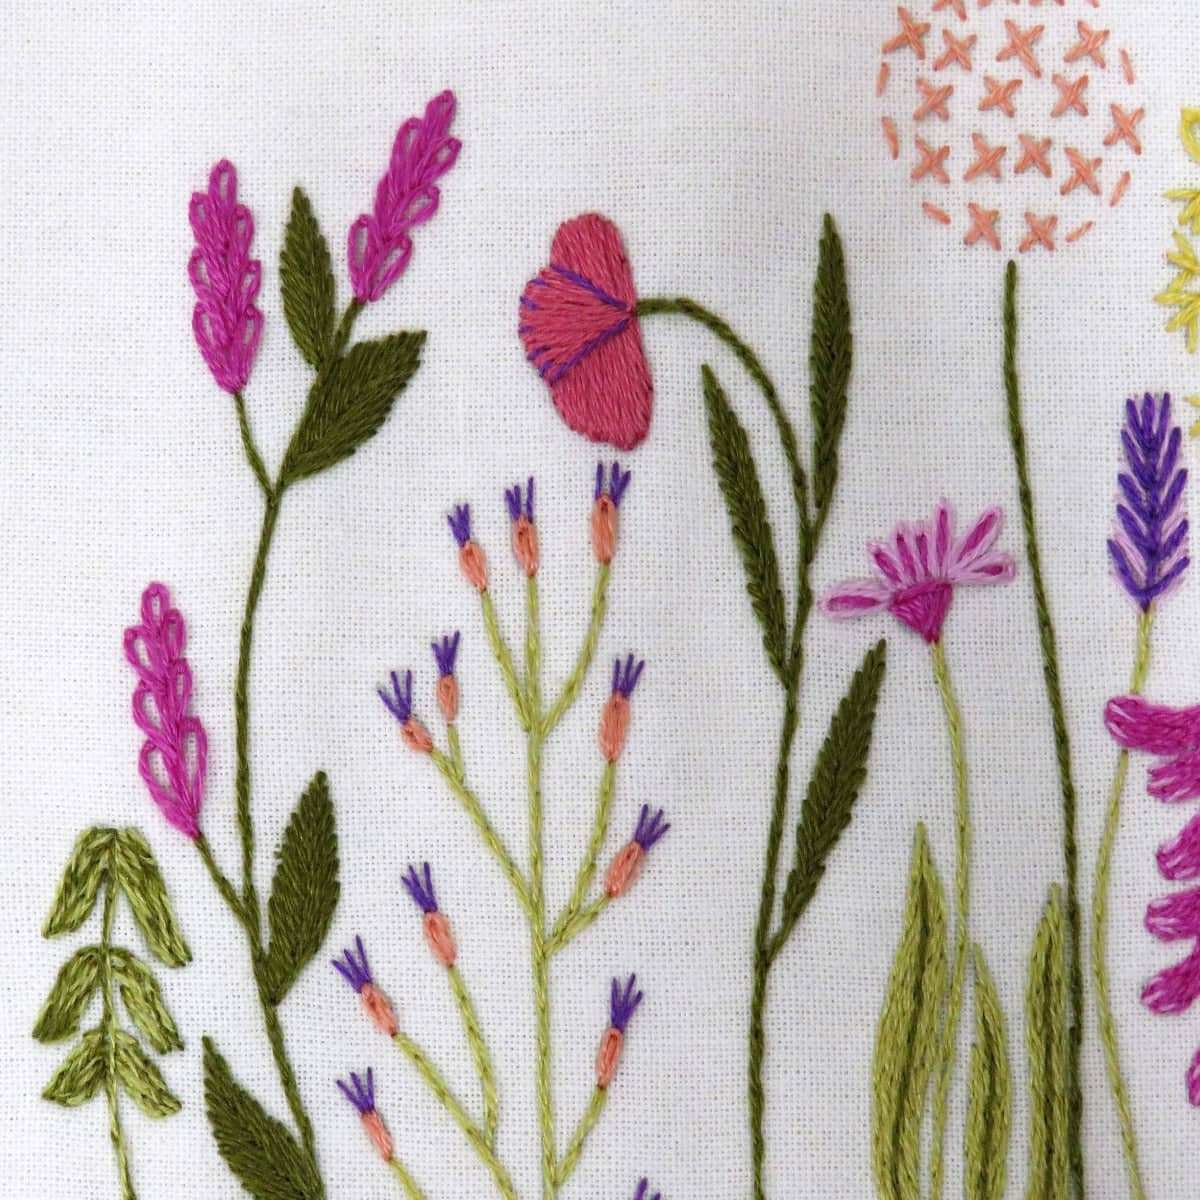 Meadow Flowers Hand Embroidery Pattern , PDF Download , StitchDoodles , bird embroidery, Embroidery, embroidery hoop, embroidery hoop kit, embroidery kit for adults, embroidery kit for beginers, embroidery kits for beginners, embroidery pattern, garden embroidery, hand embroidery, hand embroidery fabric, hand embroidery seat frame, nurge embroidery hoop, PDF pattern, Printed Pattern , StitchDoodles , shop.stitchdoodles.com